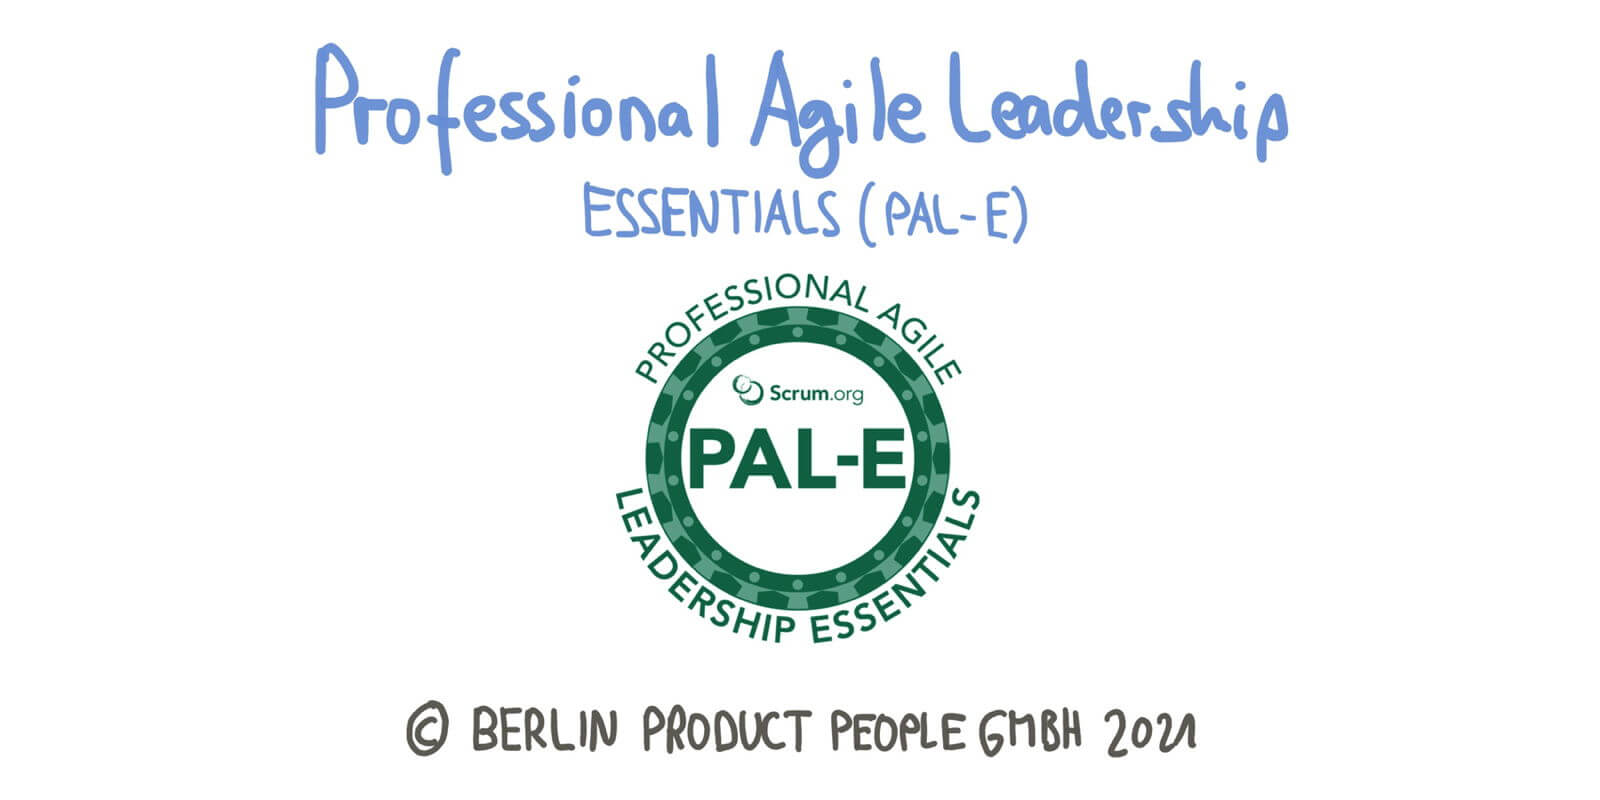 Professional Agile Leadership Essentials Schulungen — Berlin Product People GmbH